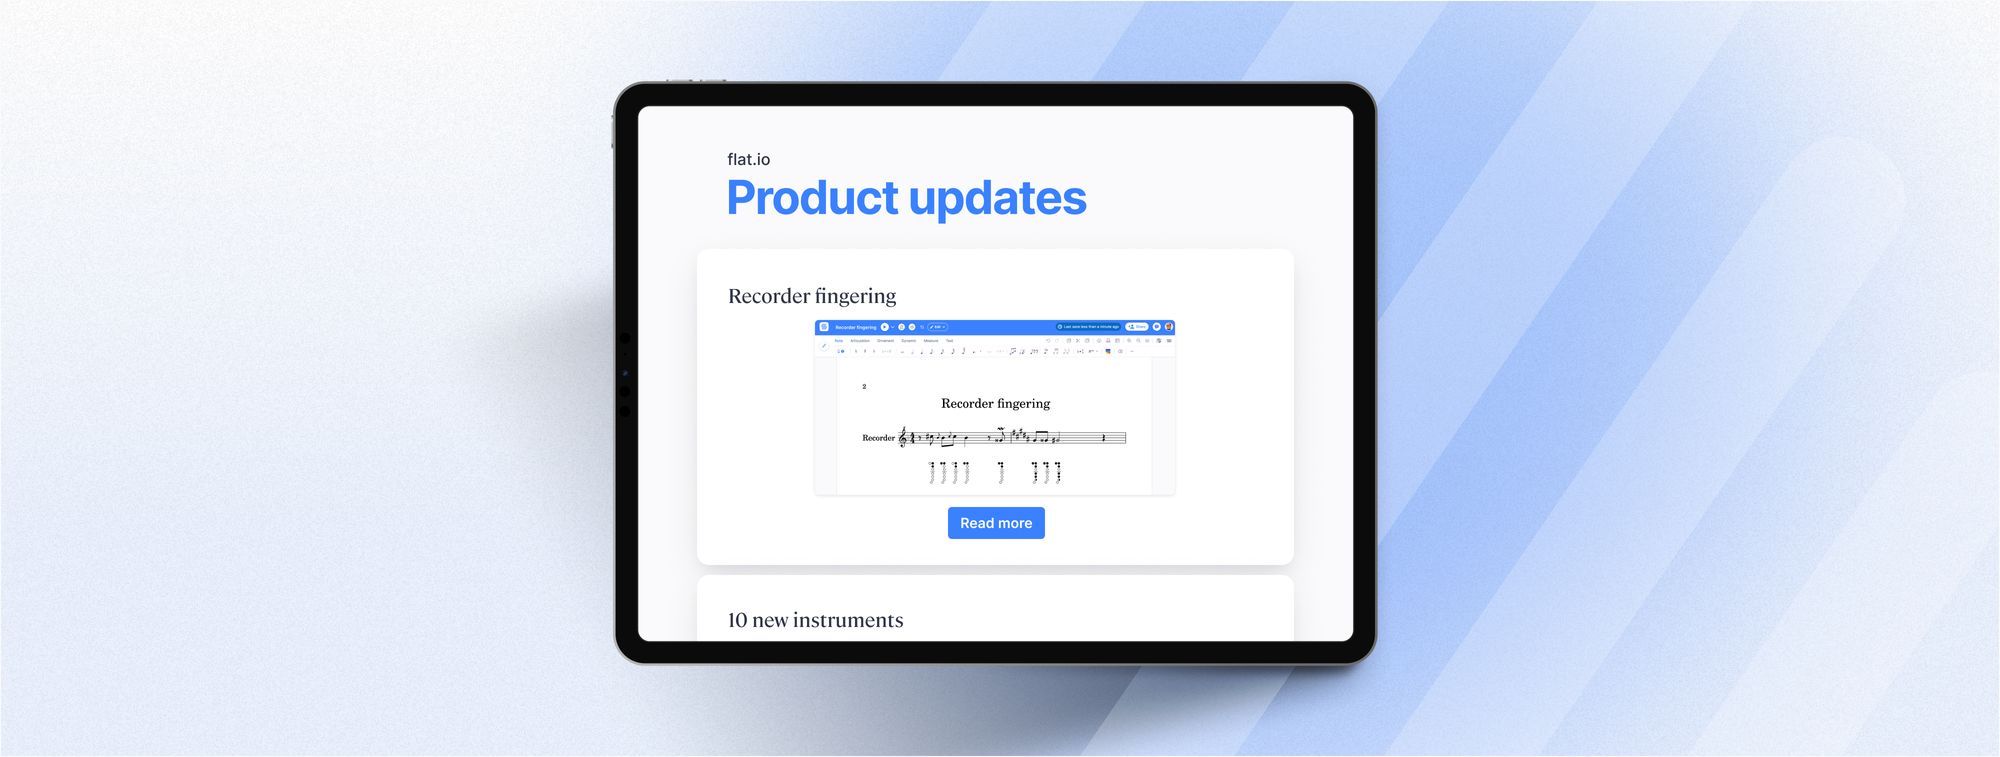 Flat updates, August 2023: Recorder fingering, new instruments, updated drag-n-drop on mobile, low CPU slider for playback, and more!